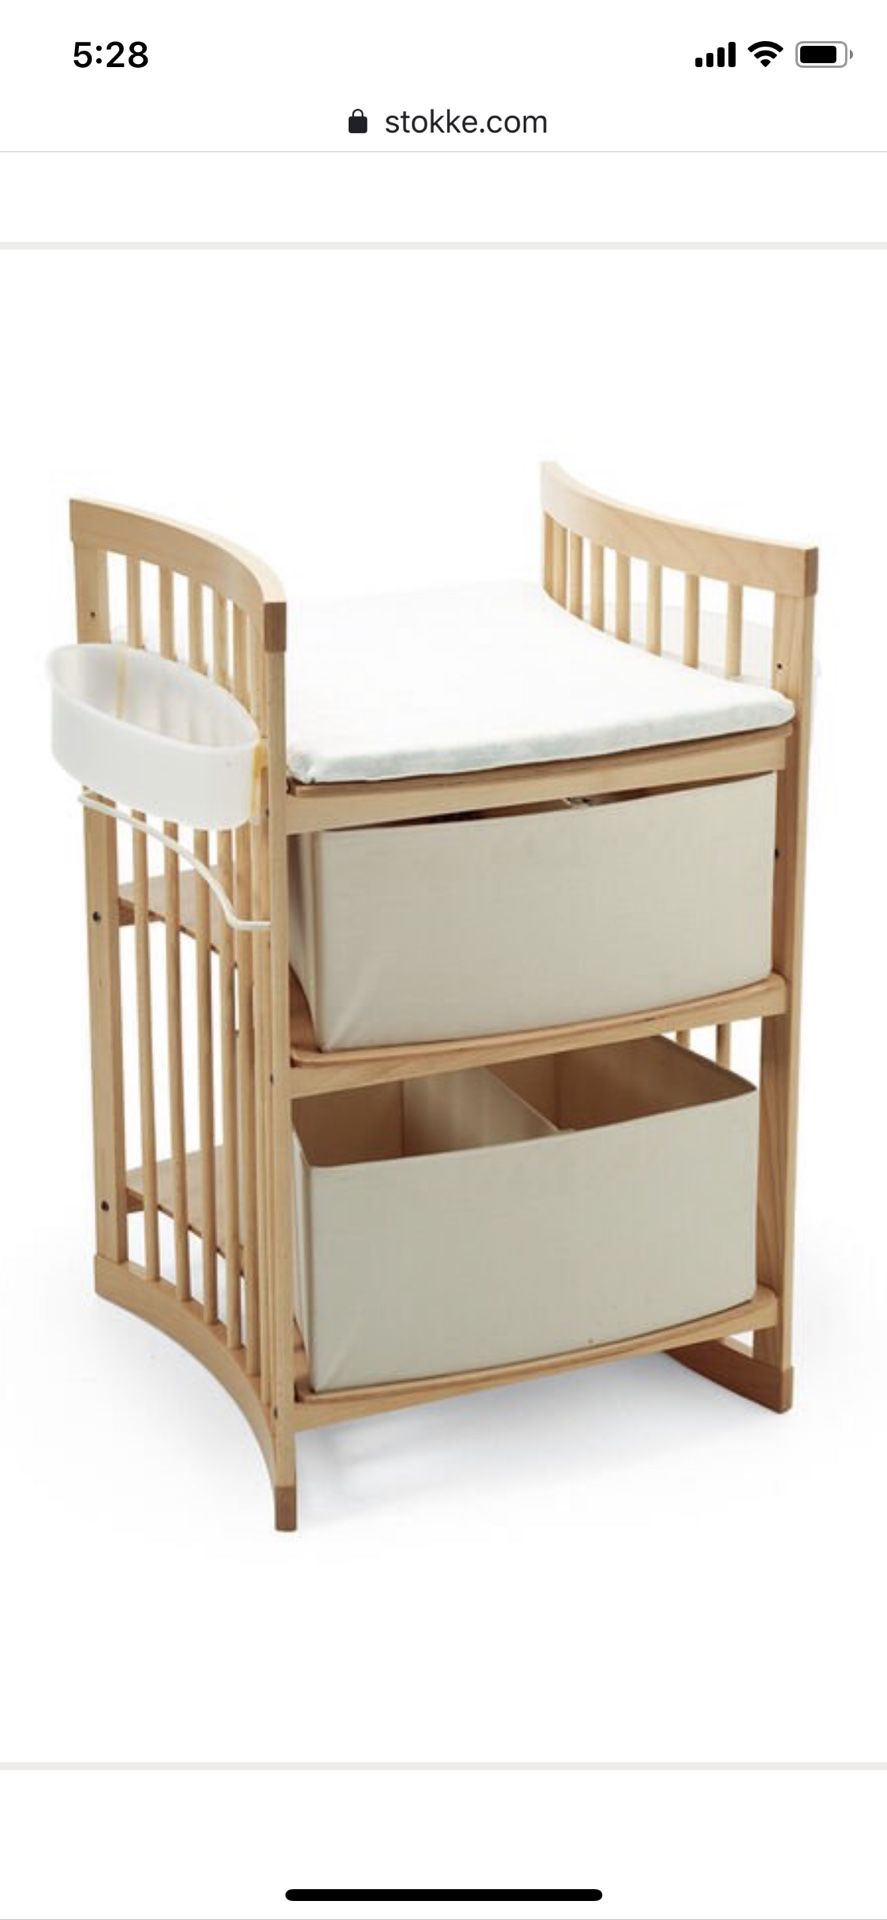 Stokke diaper changing table